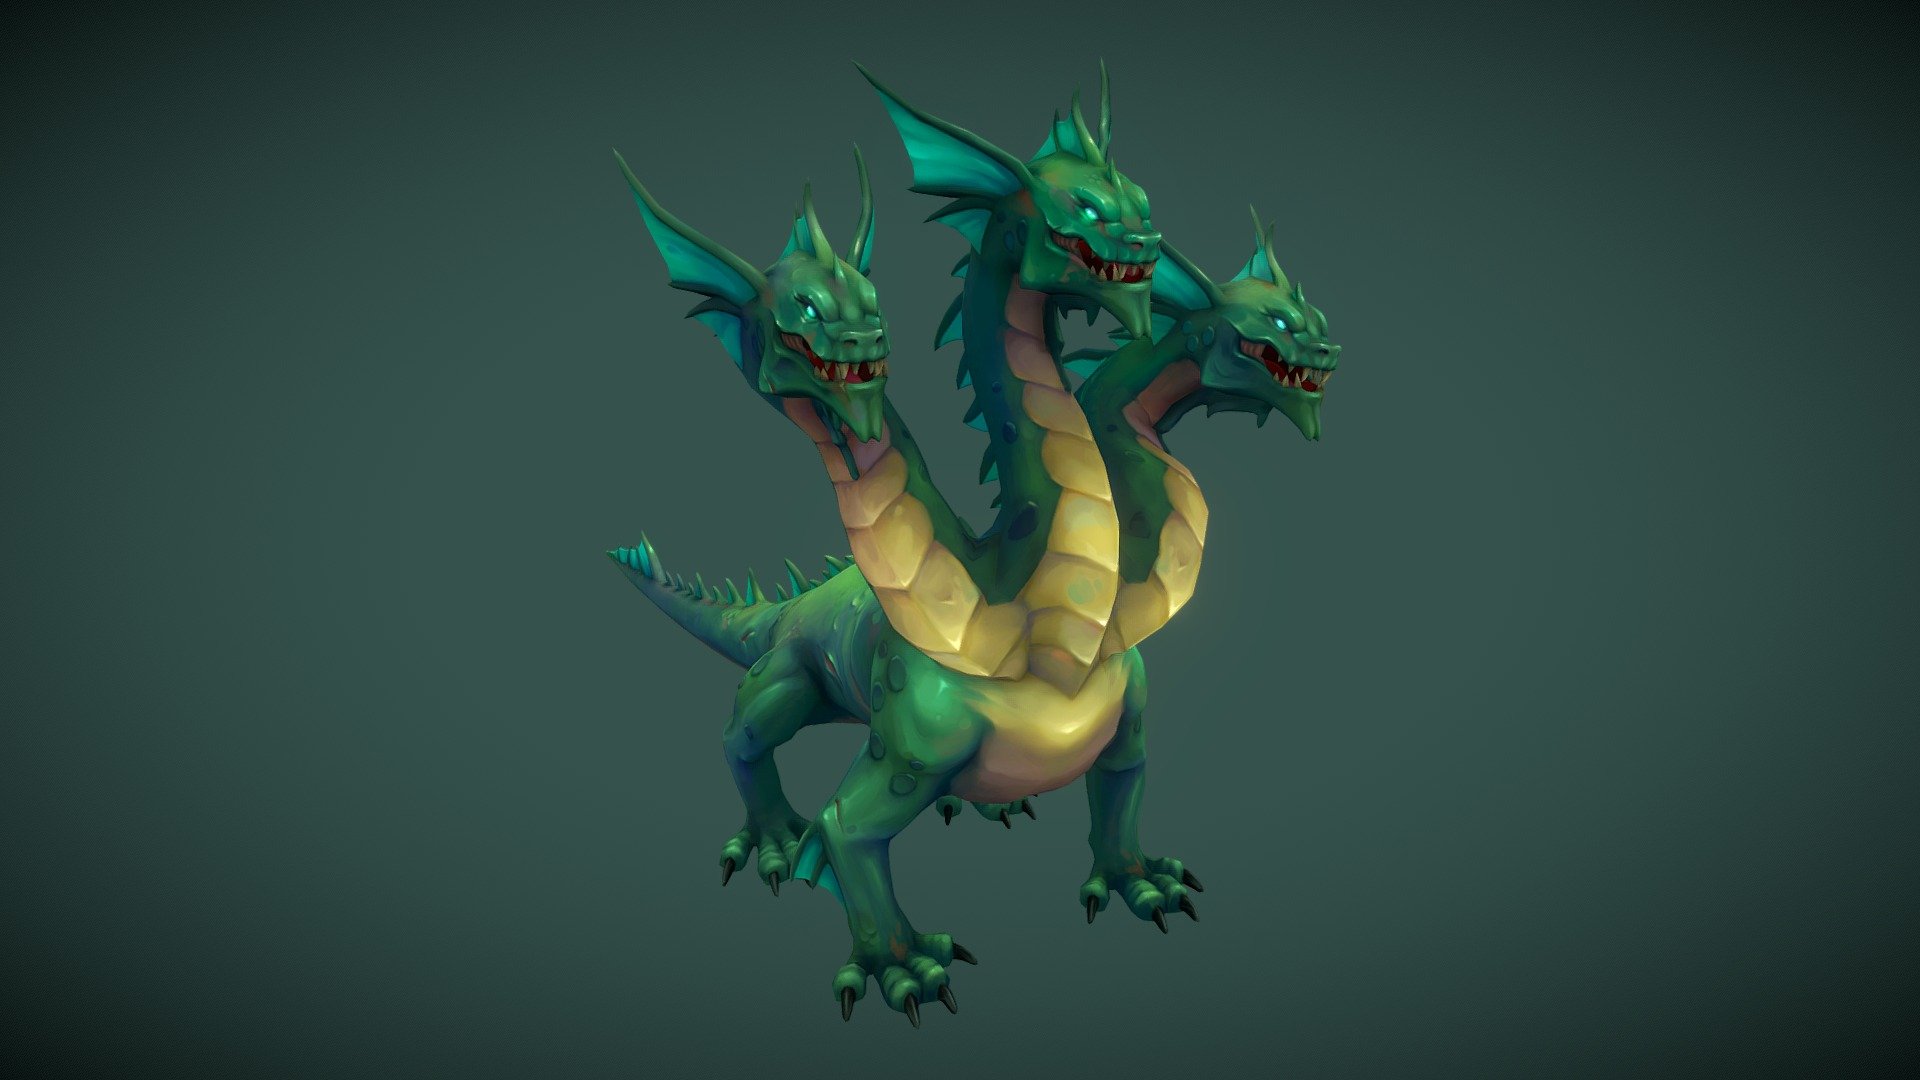 Stylized character for a project.

Software used: Zbrush, Autodesk Maya, Autodesk 3ds Max, Substance Painter - Stylized Hydra - 3D model by N-hance Studio (@Malice6731) 3d model